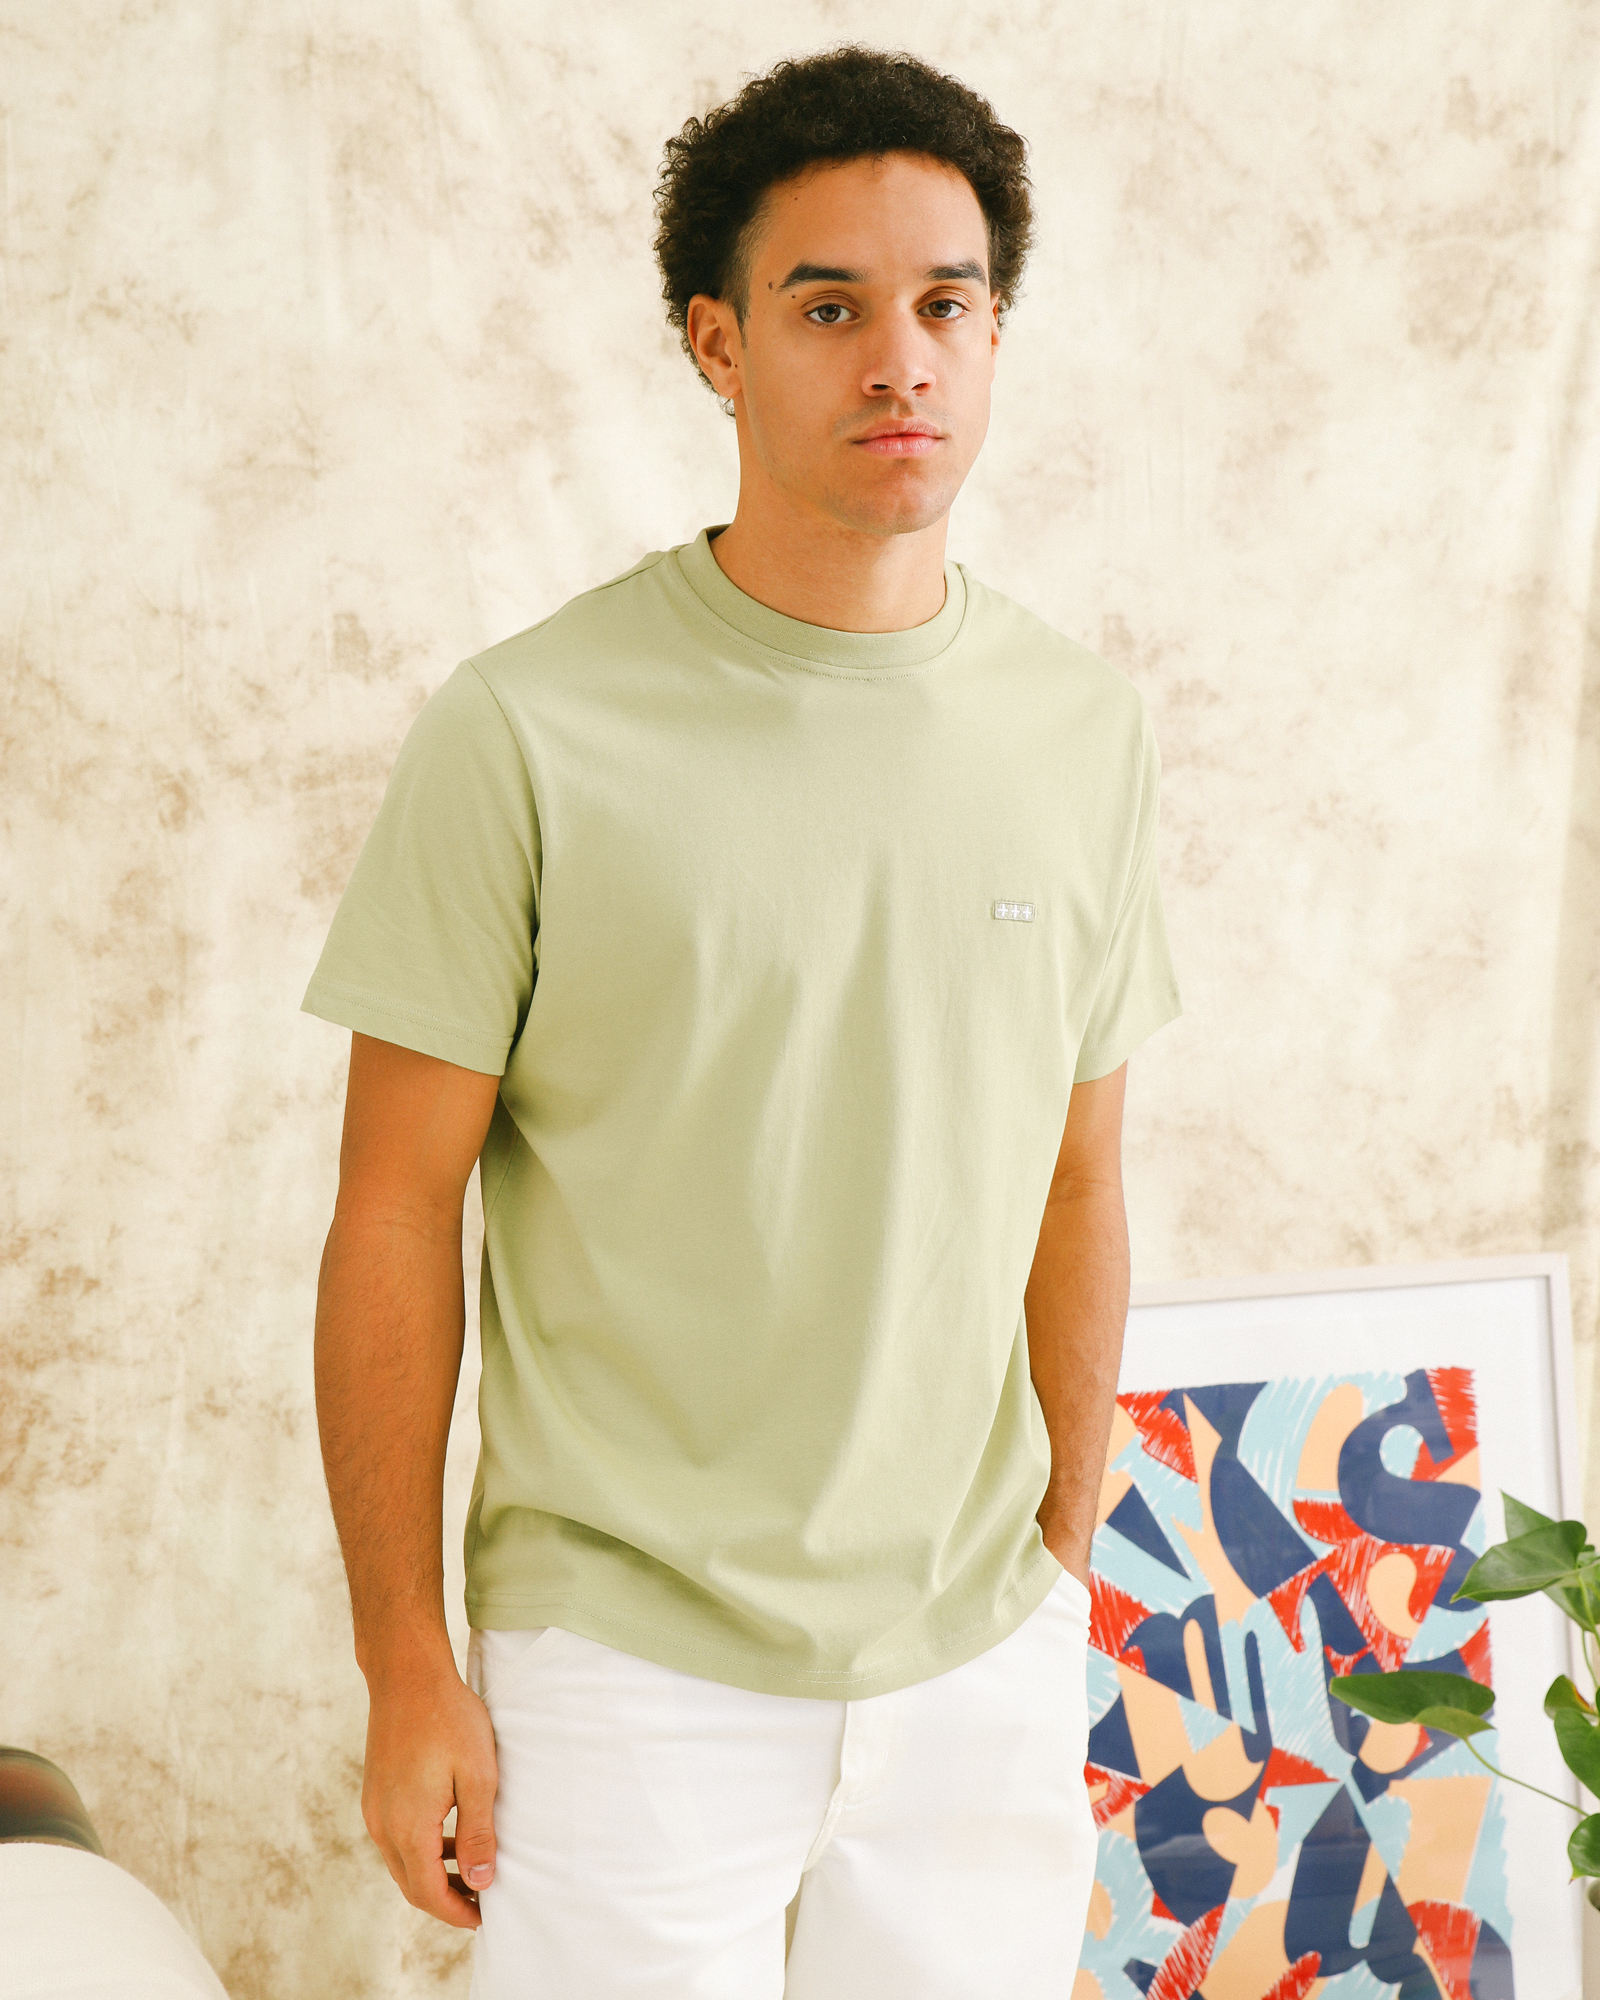  The new Quality Blanks summer collection
